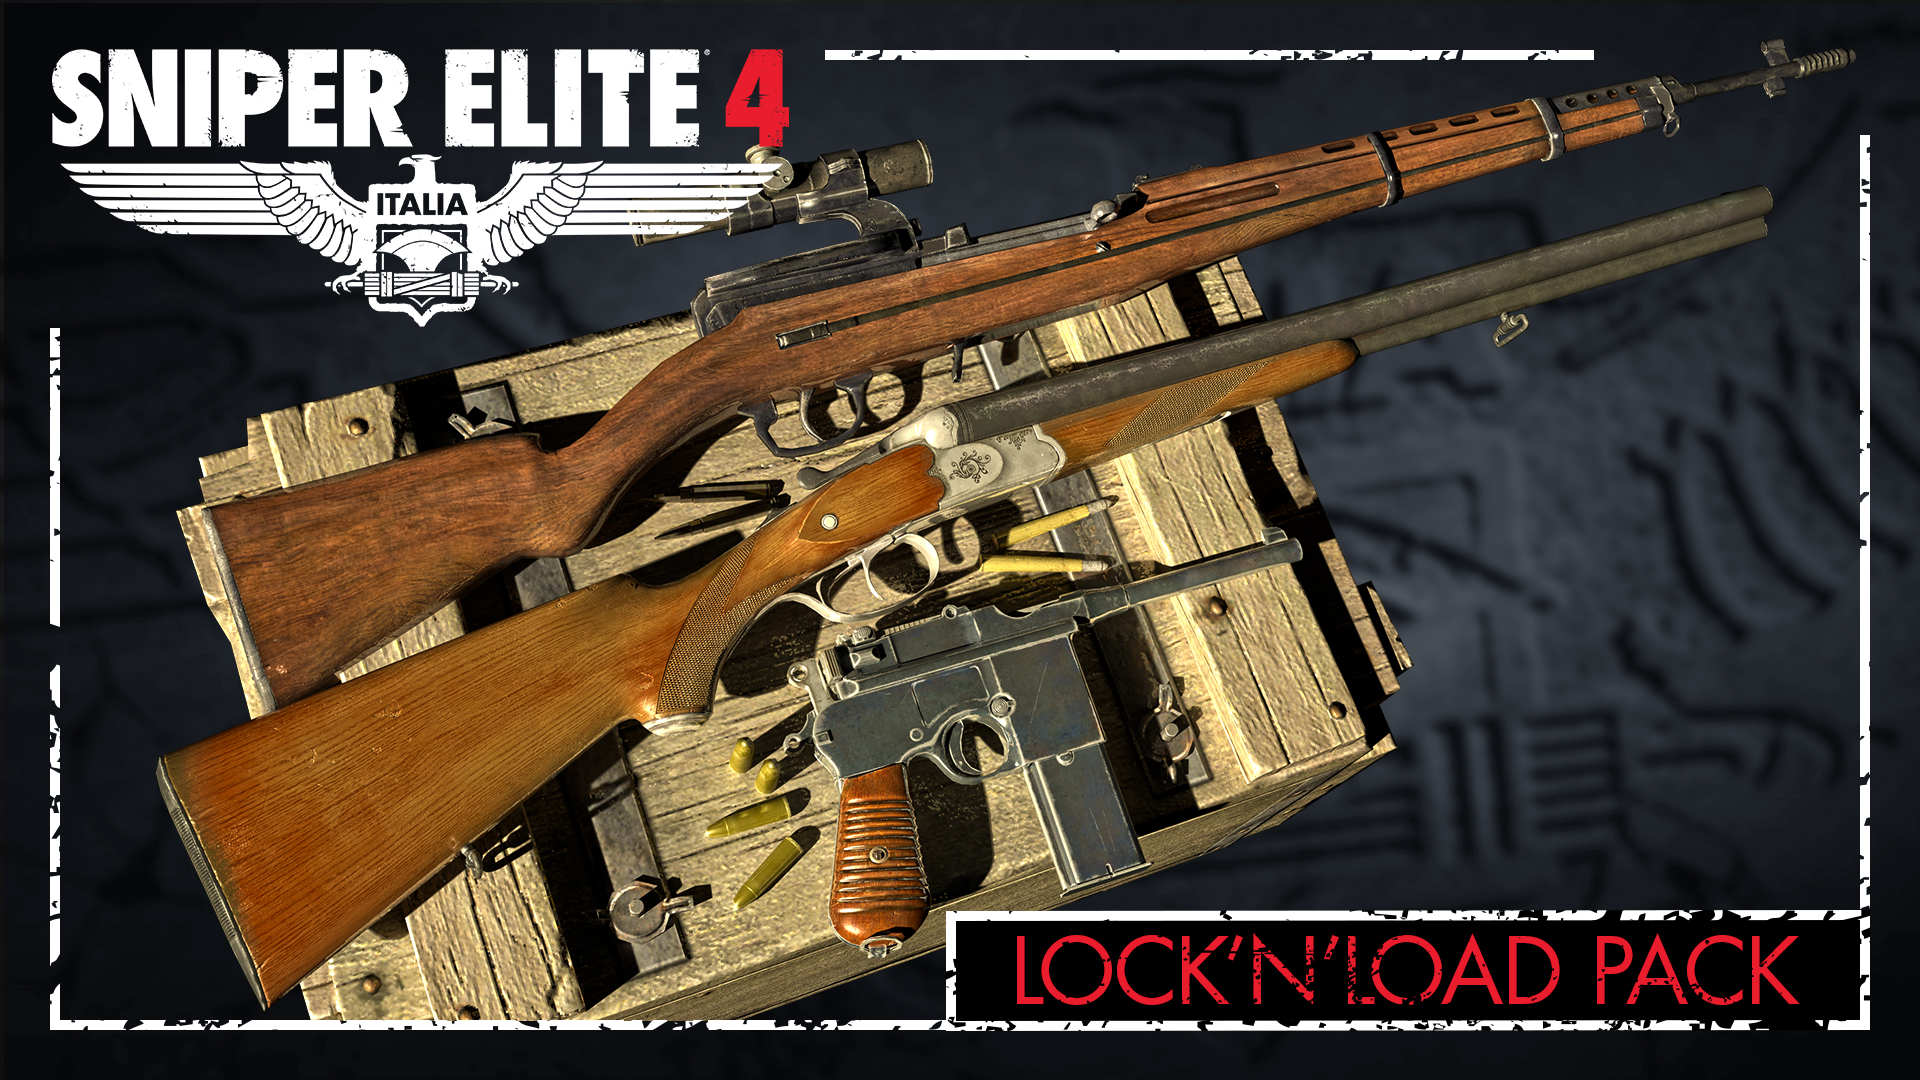 Sniper Elite 4 - Lock and Load Weapons Pack DLC Steam CD Key 4.51 usd